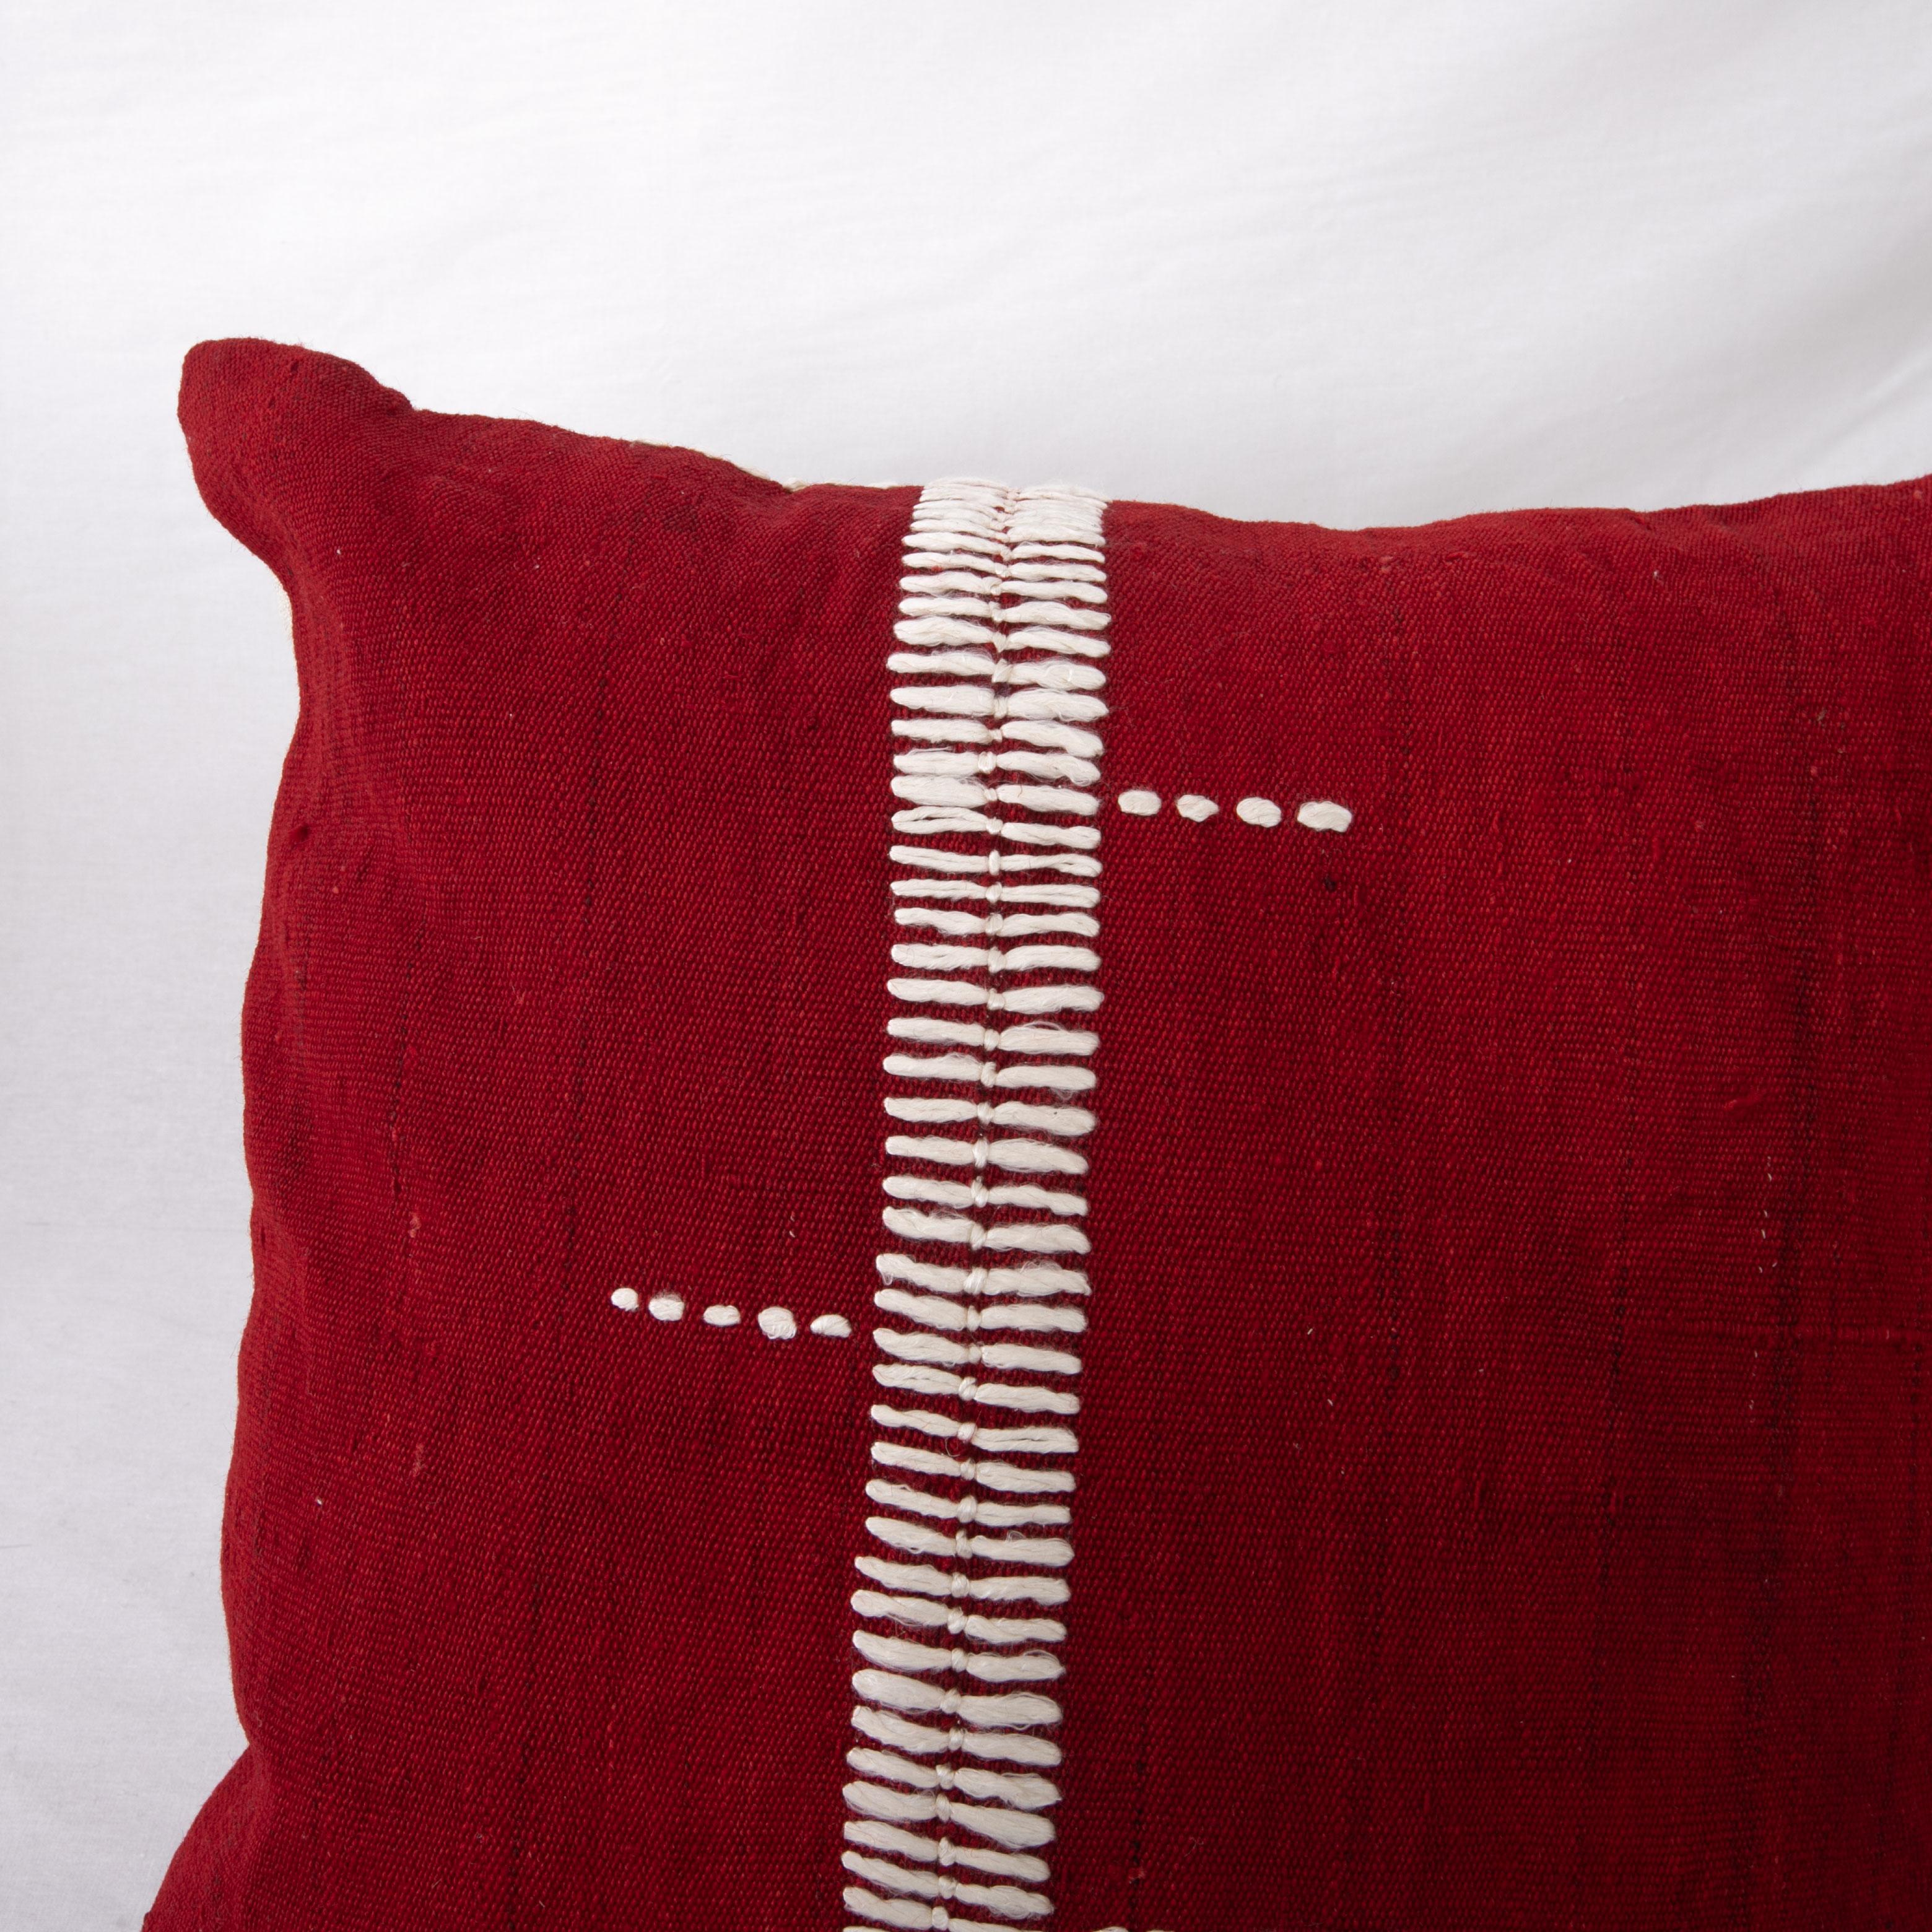 Mid-Century Modern Pillowcase Made from an Eastern Anatolian Perde ‘ cover’, Mid 20th C.